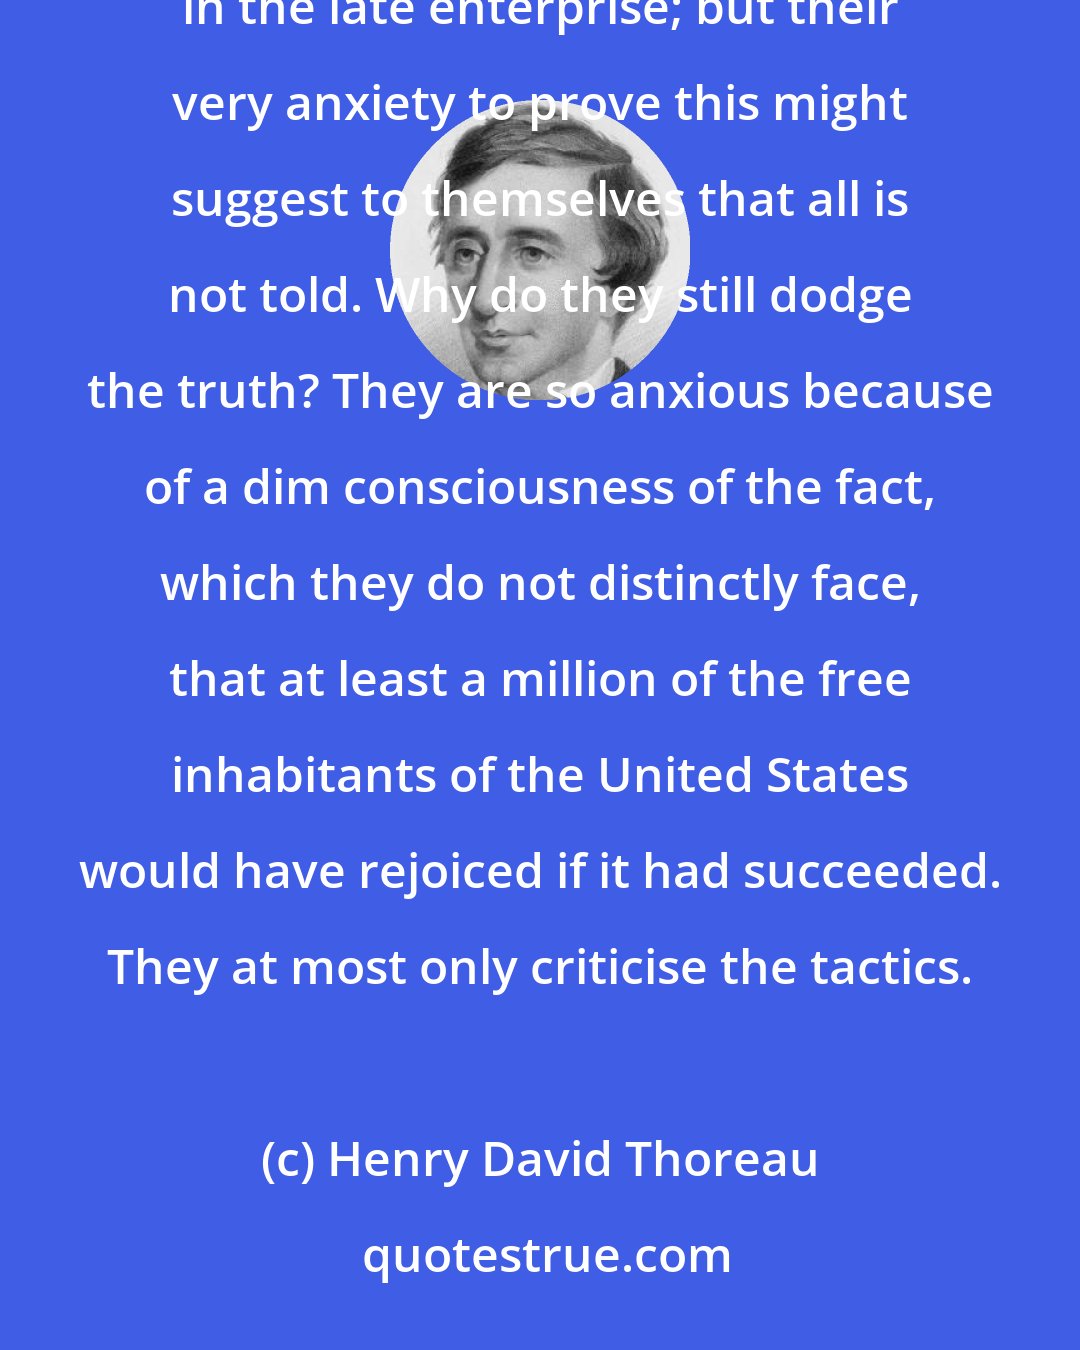 Henry David Thoreau: Perhaps anxious politicians may prove that only seventeen white men and five negroes were concerned in the late enterprise; but their very anxiety to prove this might suggest to themselves that all is not told. Why do they still dodge the truth? They are so anxious because of a dim consciousness of the fact, which they do not distinctly face, that at least a million of the free inhabitants of the United States would have rejoiced if it had succeeded. They at most only criticise the tactics.